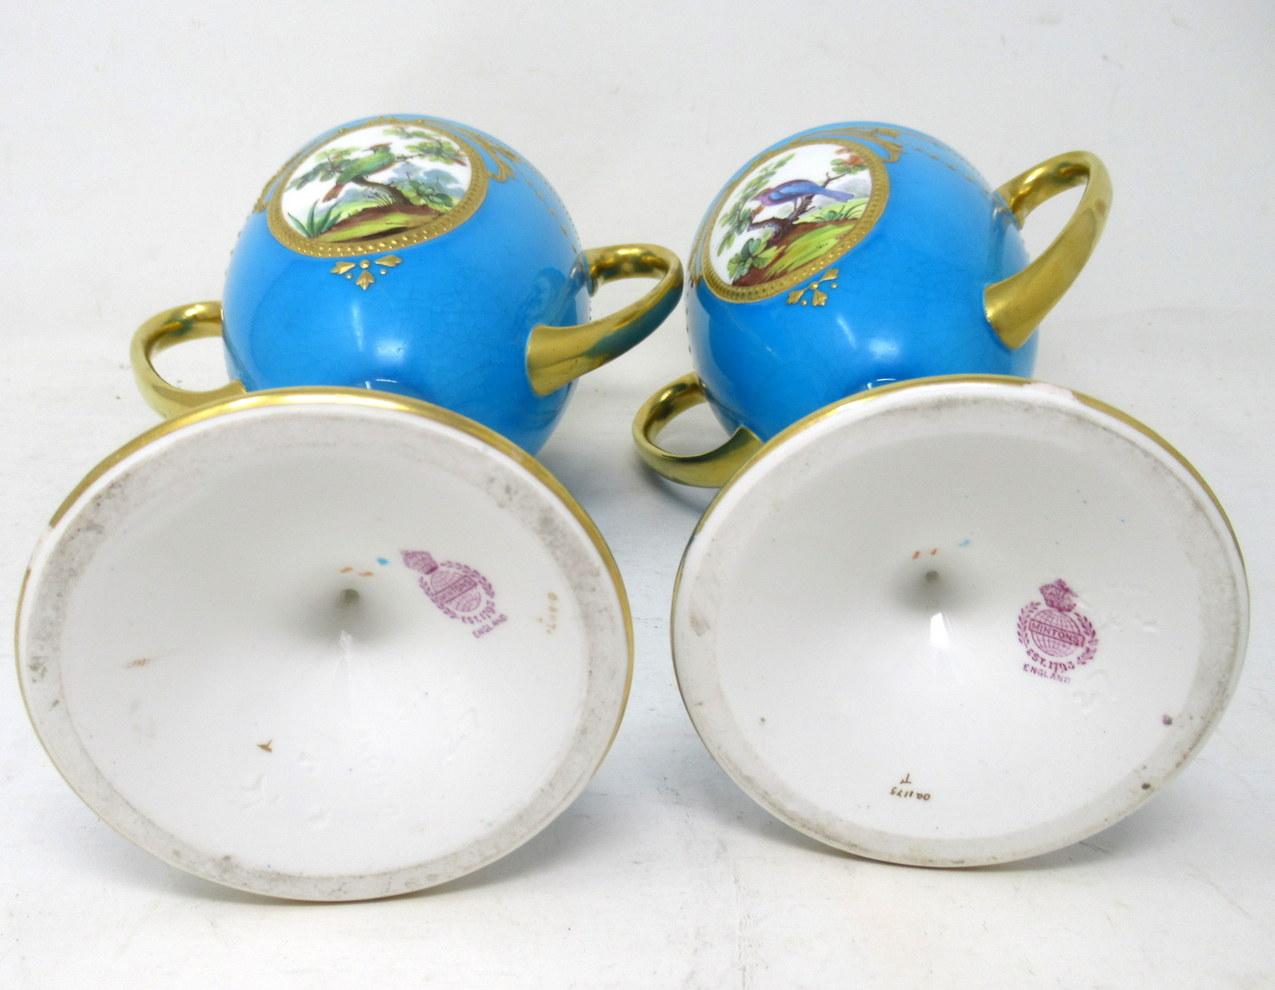 Antique Pair Minton Staffordshire Porcelain Vases Centerpieces Birds Turquoise In Good Condition For Sale In Dublin, Ireland